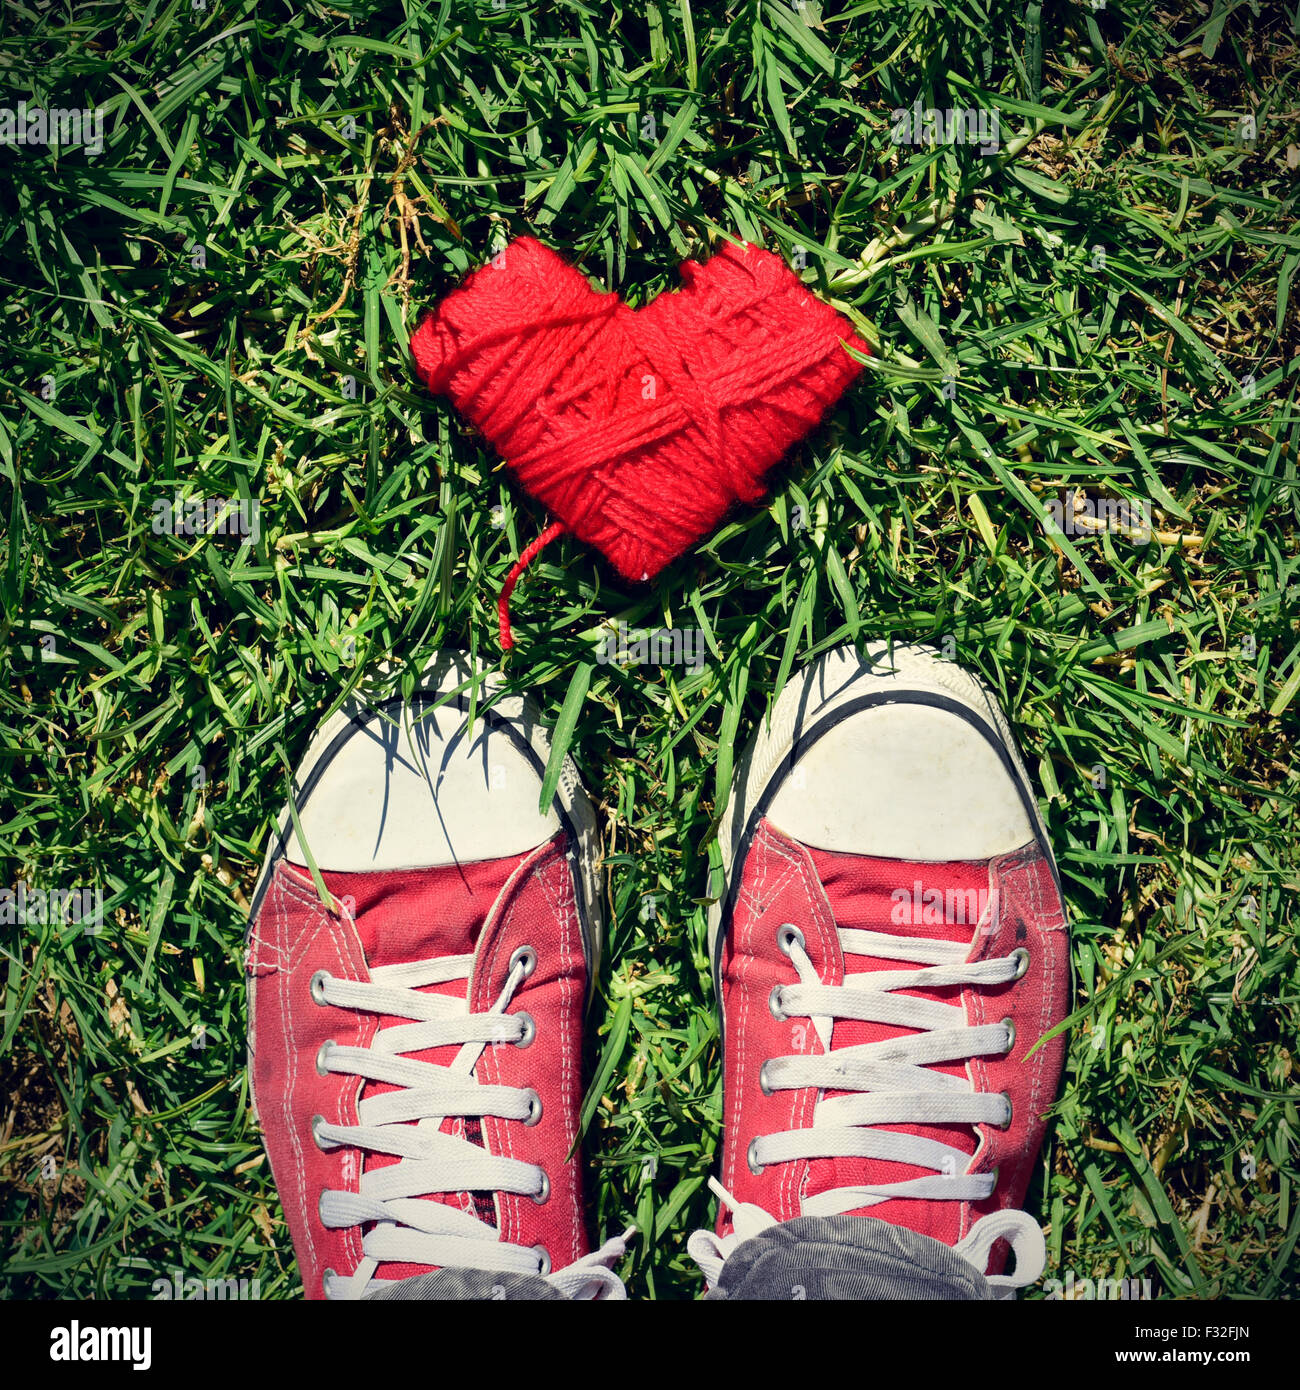 a heart-shaped coil of red rope and the feet of a man wearing red sneakers stepping on the grass, with a slight vignette added Stock Photo